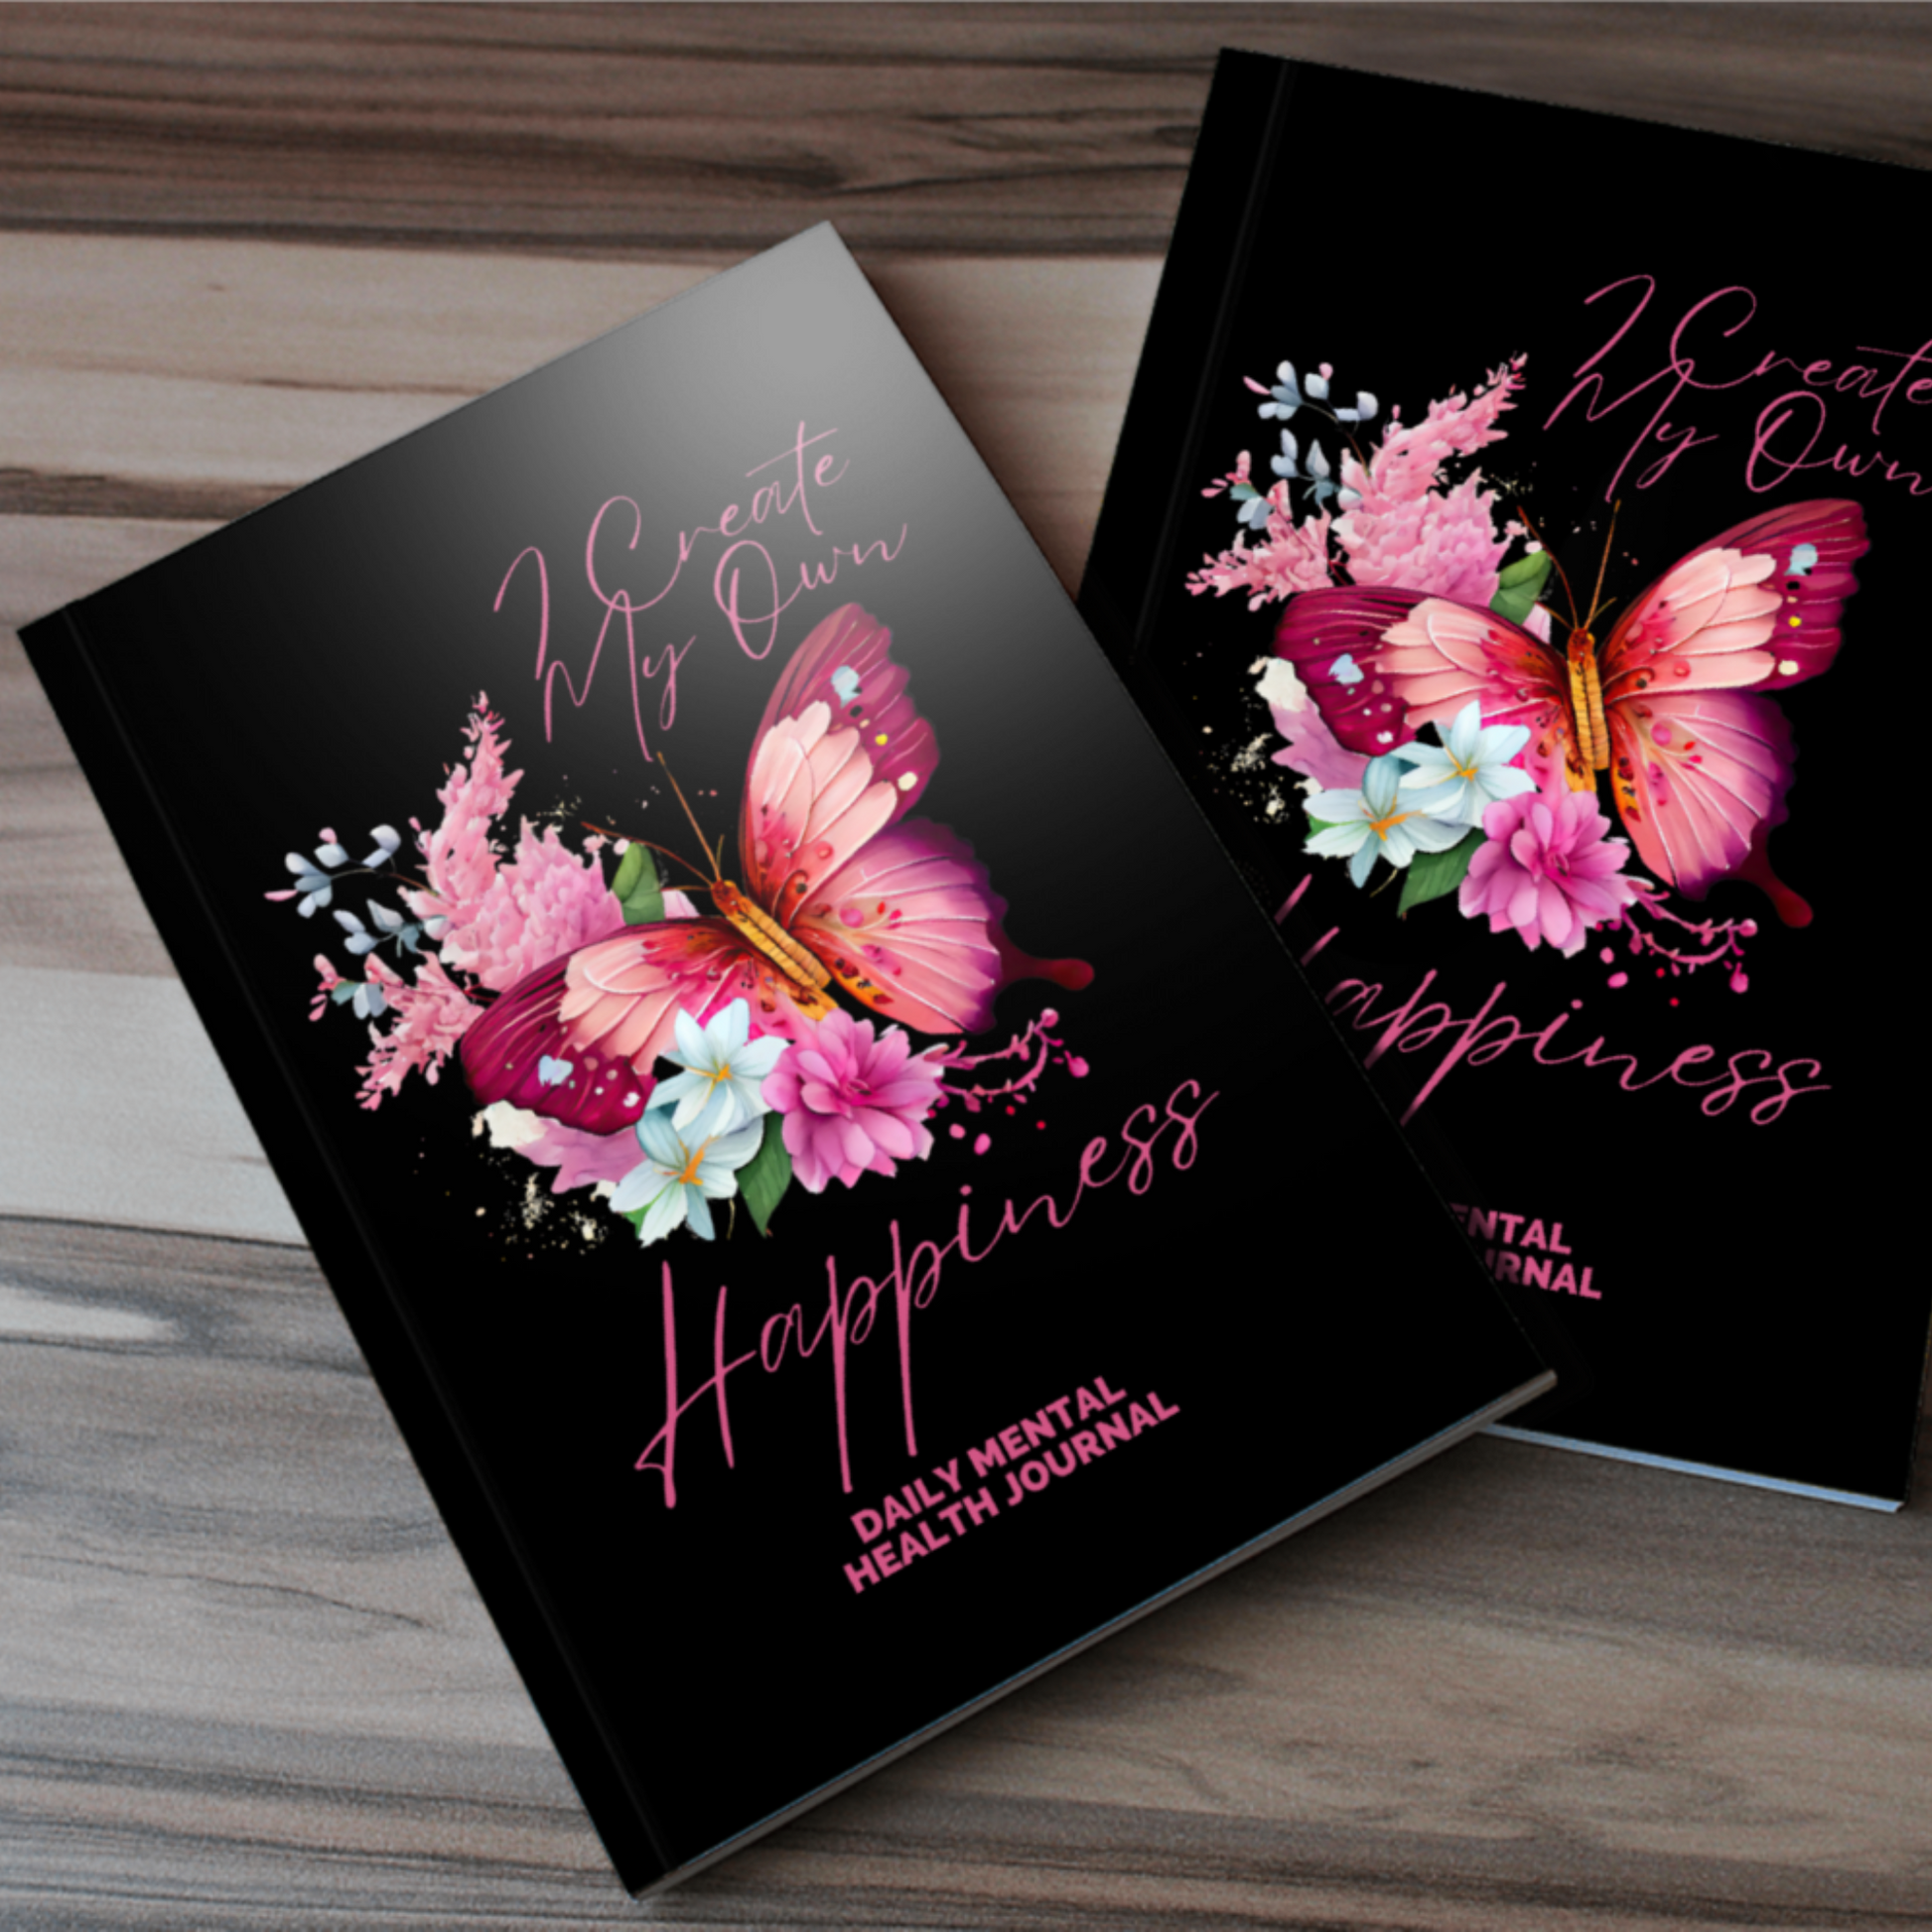 I Create My Own Happiness Mental Health Journal for KDP Amazon & The Book Patch